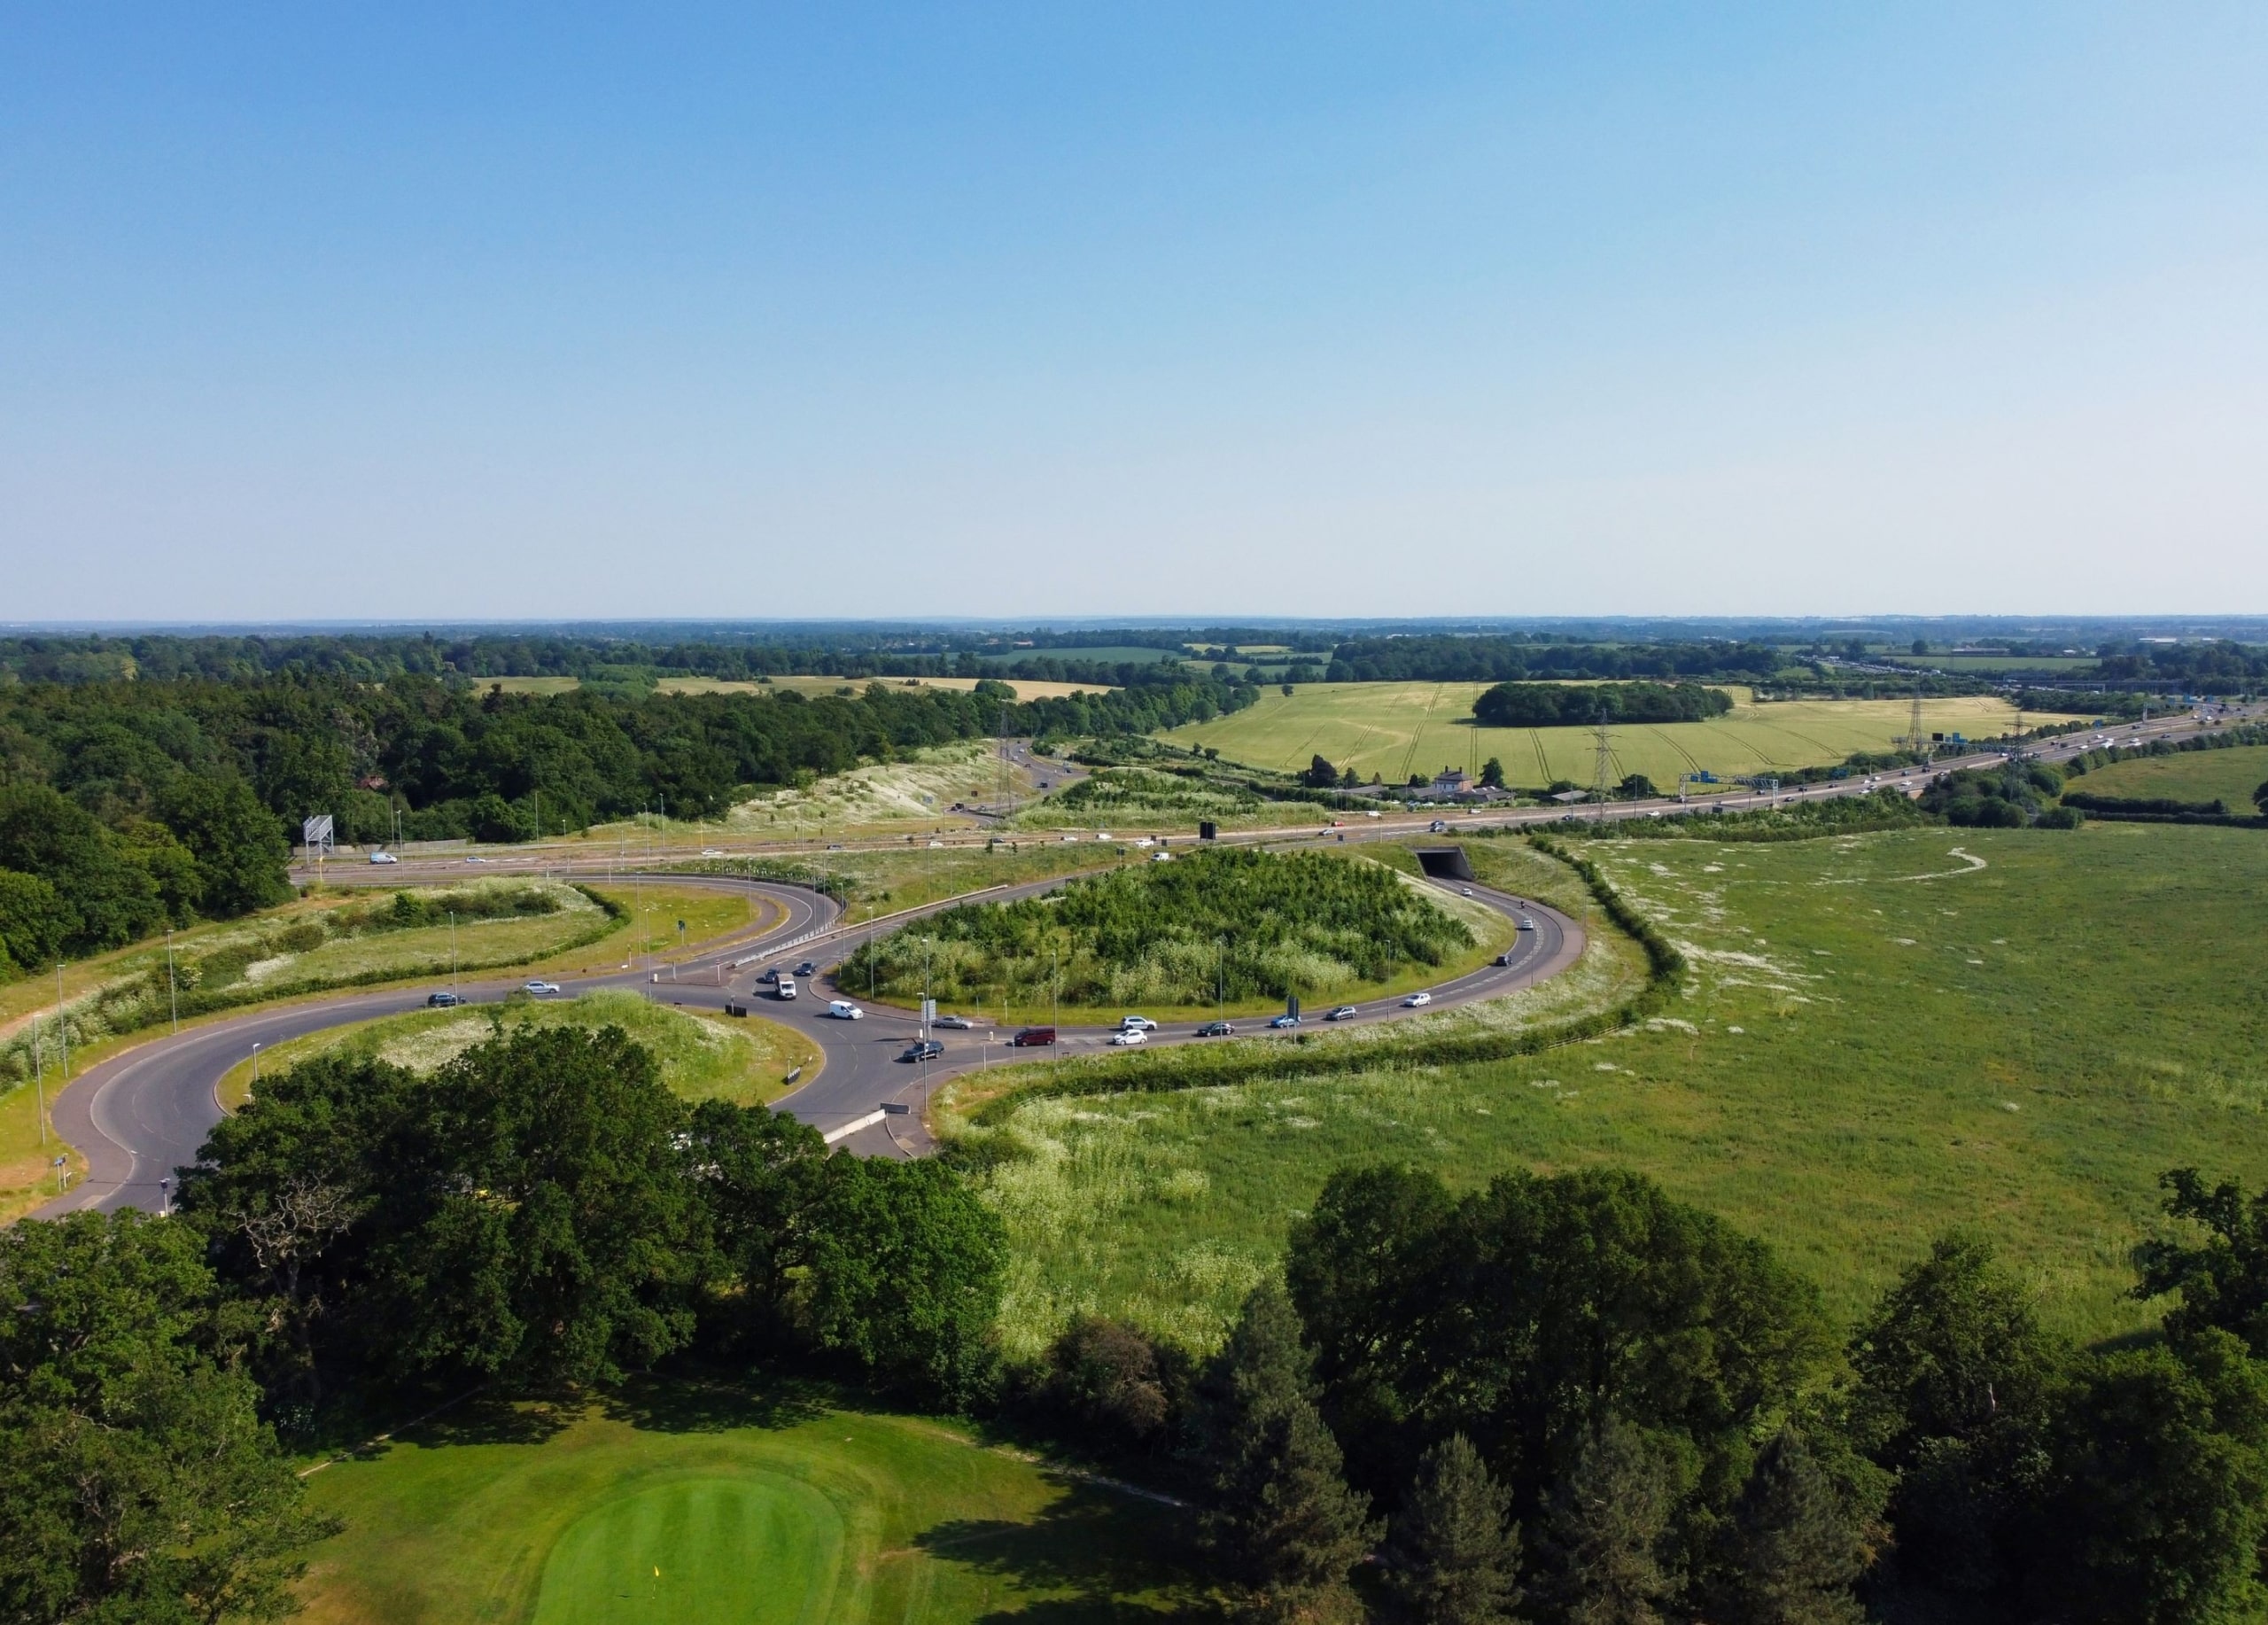 A bird's-eye view of a roundabout forming part of the external roads near Luton airport.